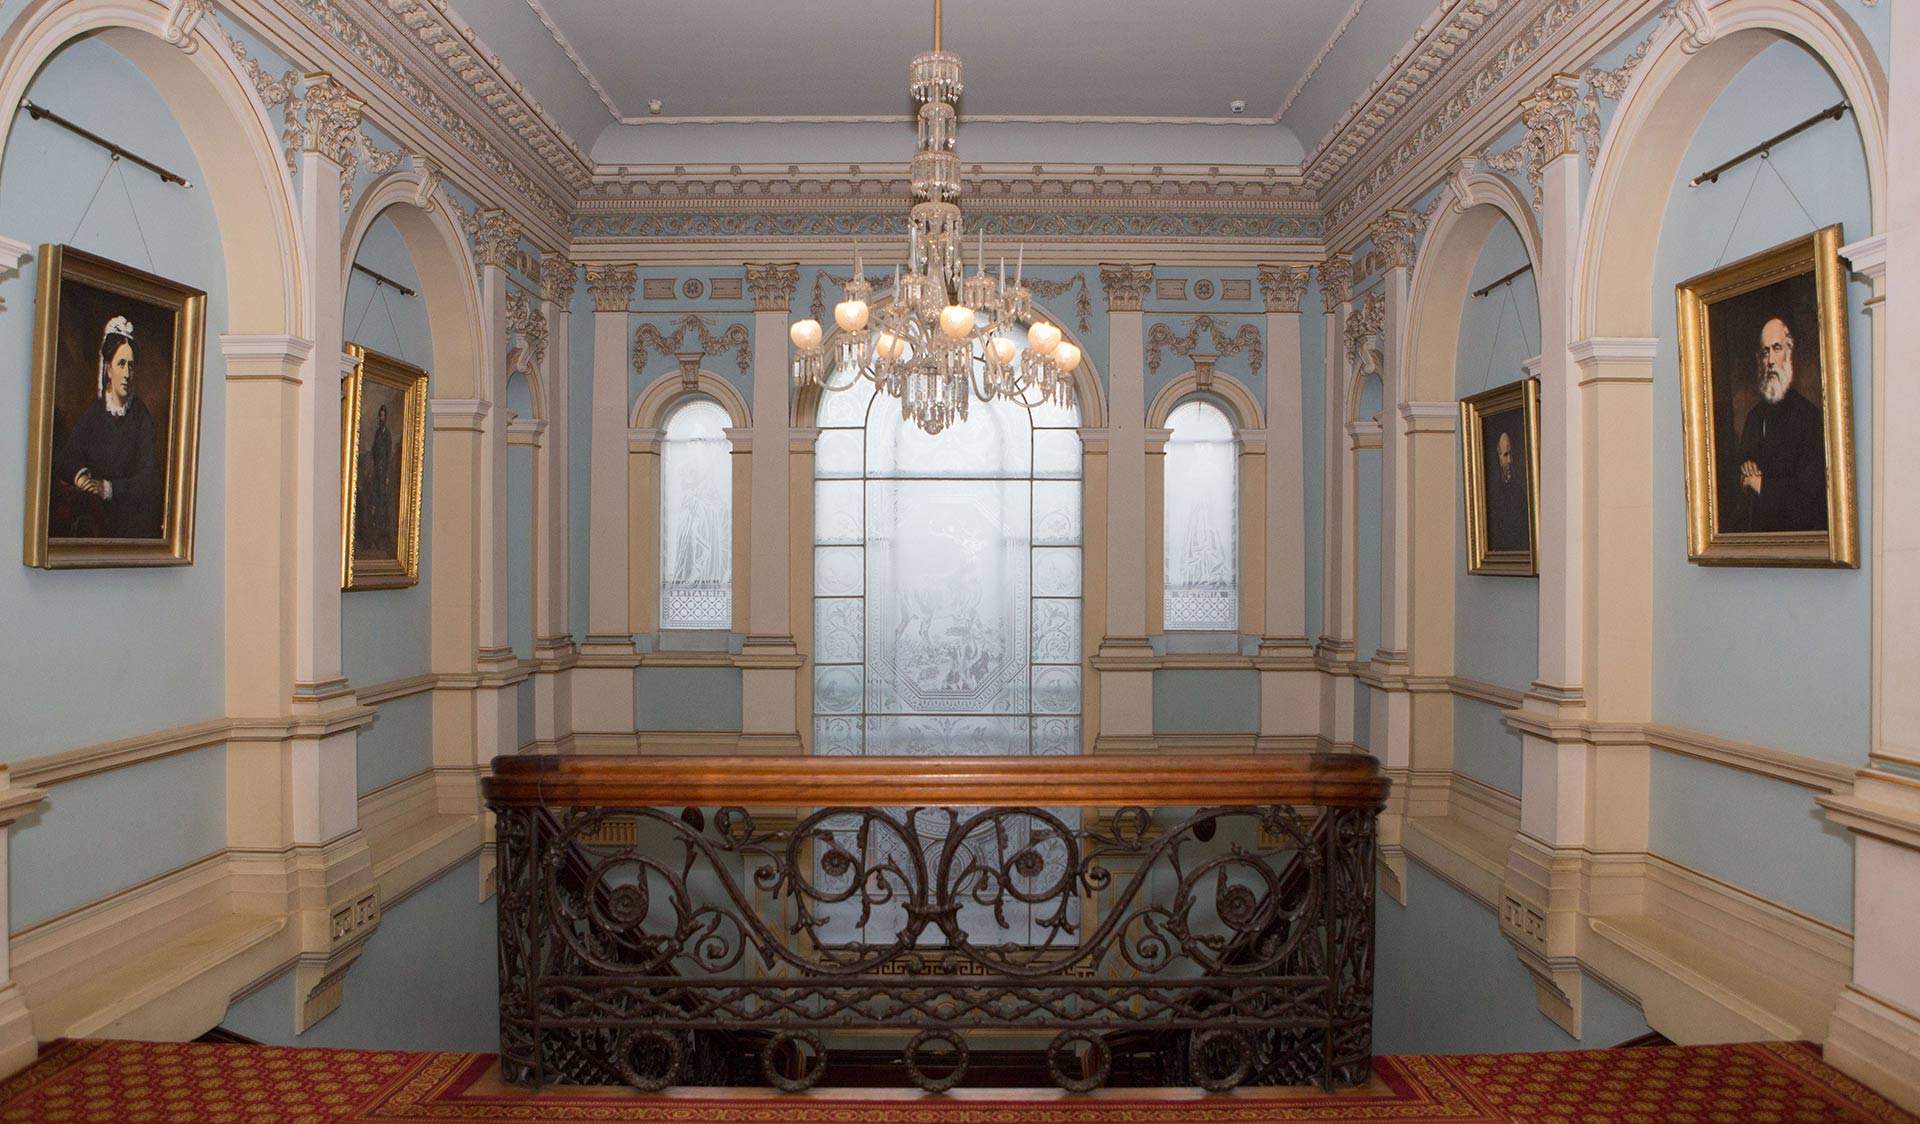 The interior of the historic Werribee Park Mansion.